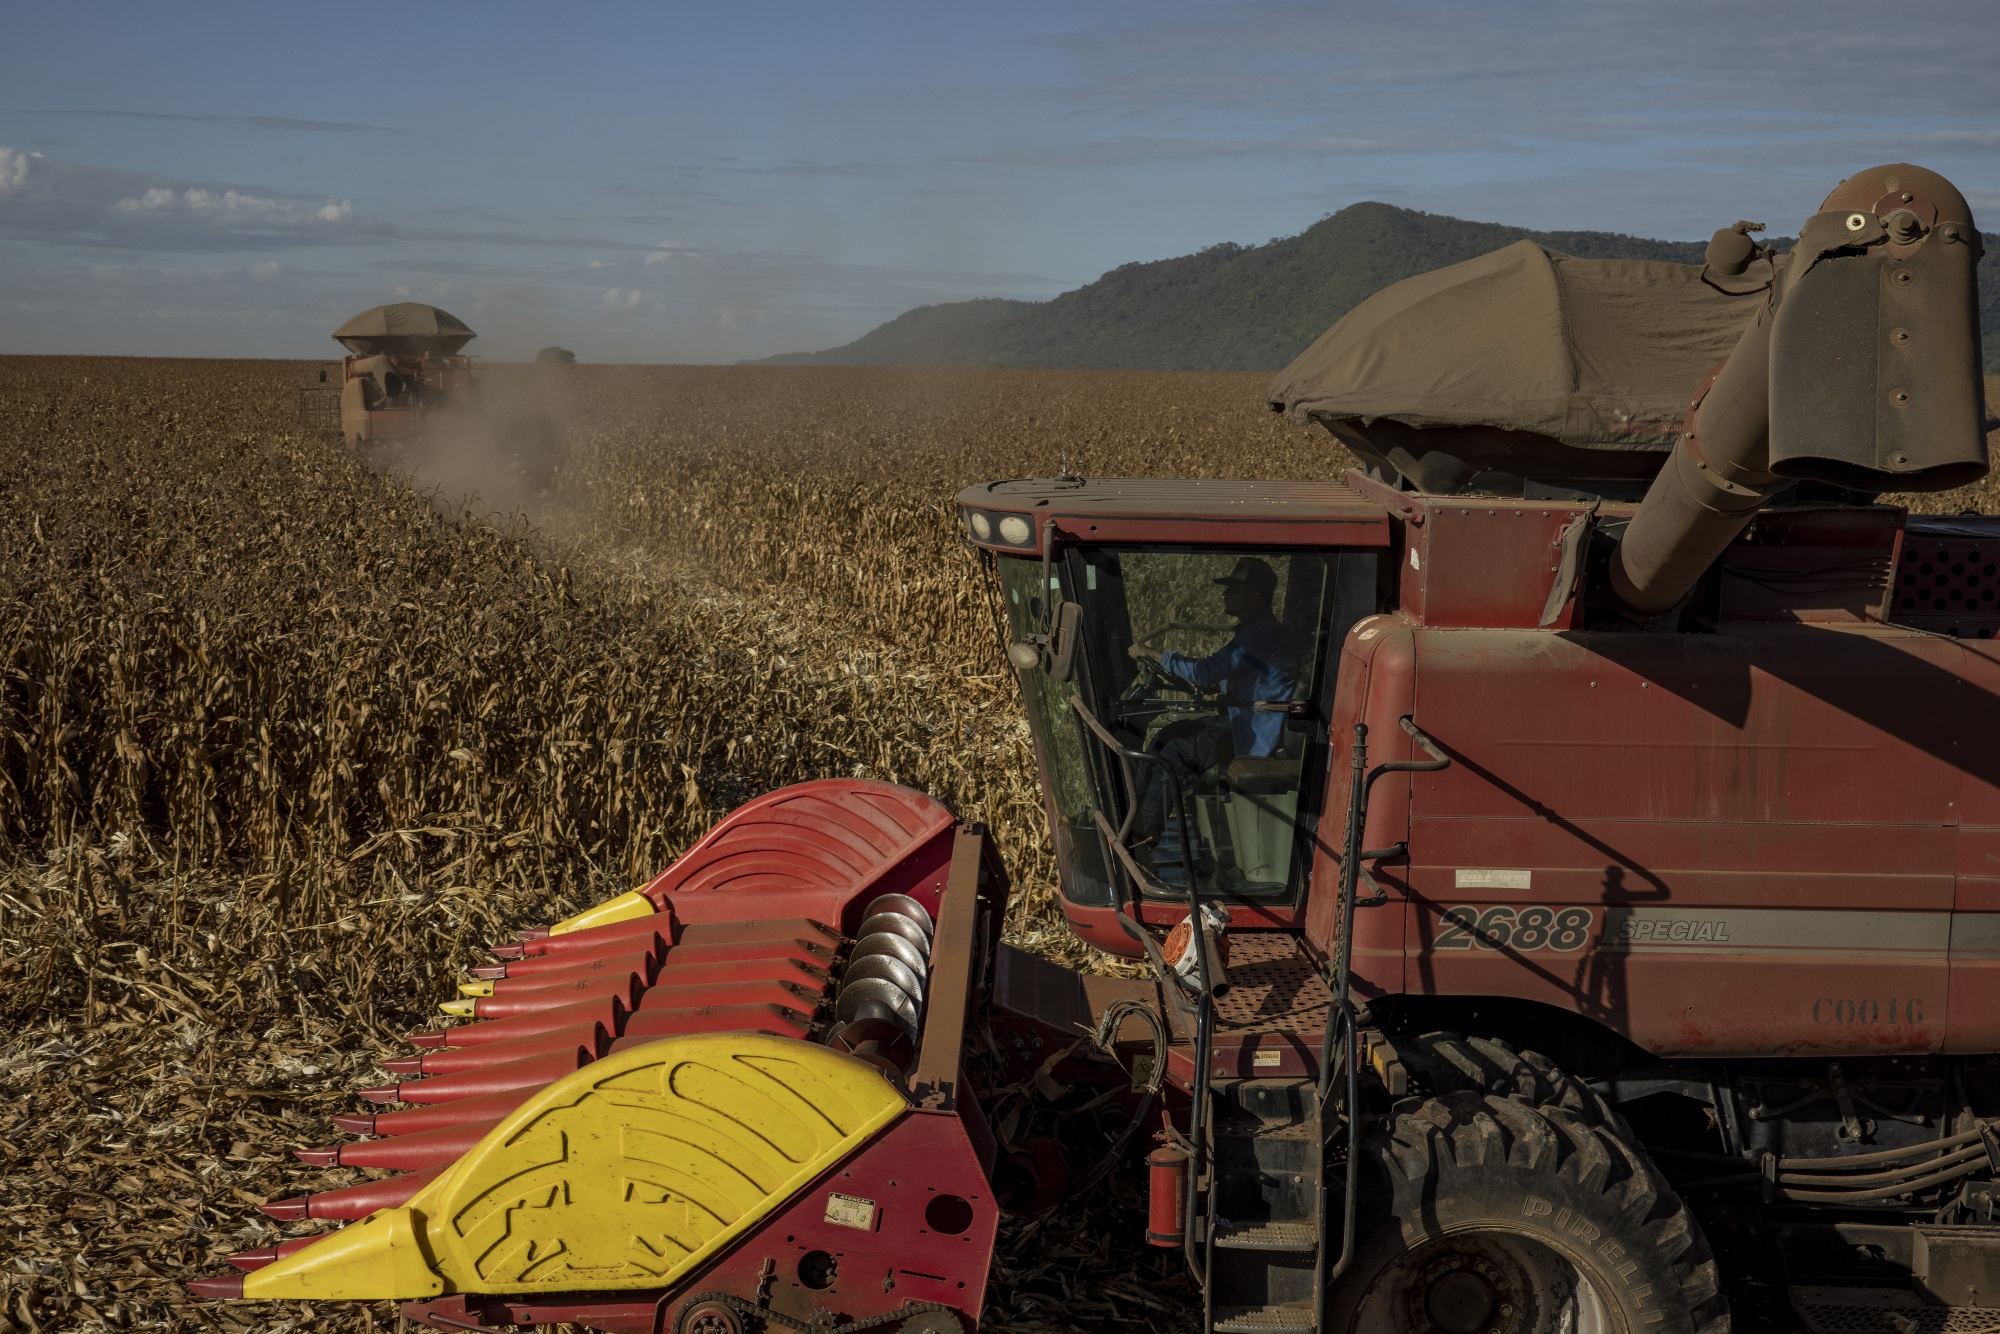 Grain Trade Becoming More Digitized, Agro.Club Expands B2B Grain  Marketplace Into Brazil